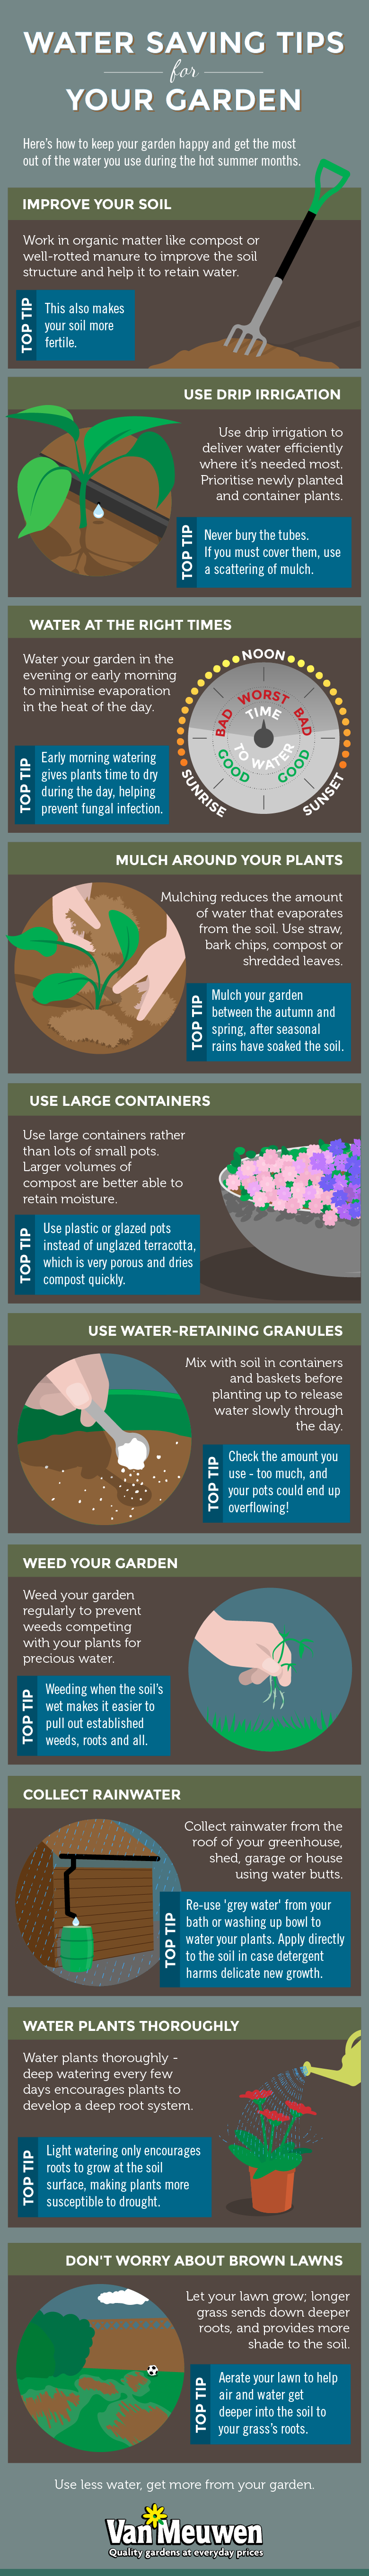 Water Saving Tips for Your Garden